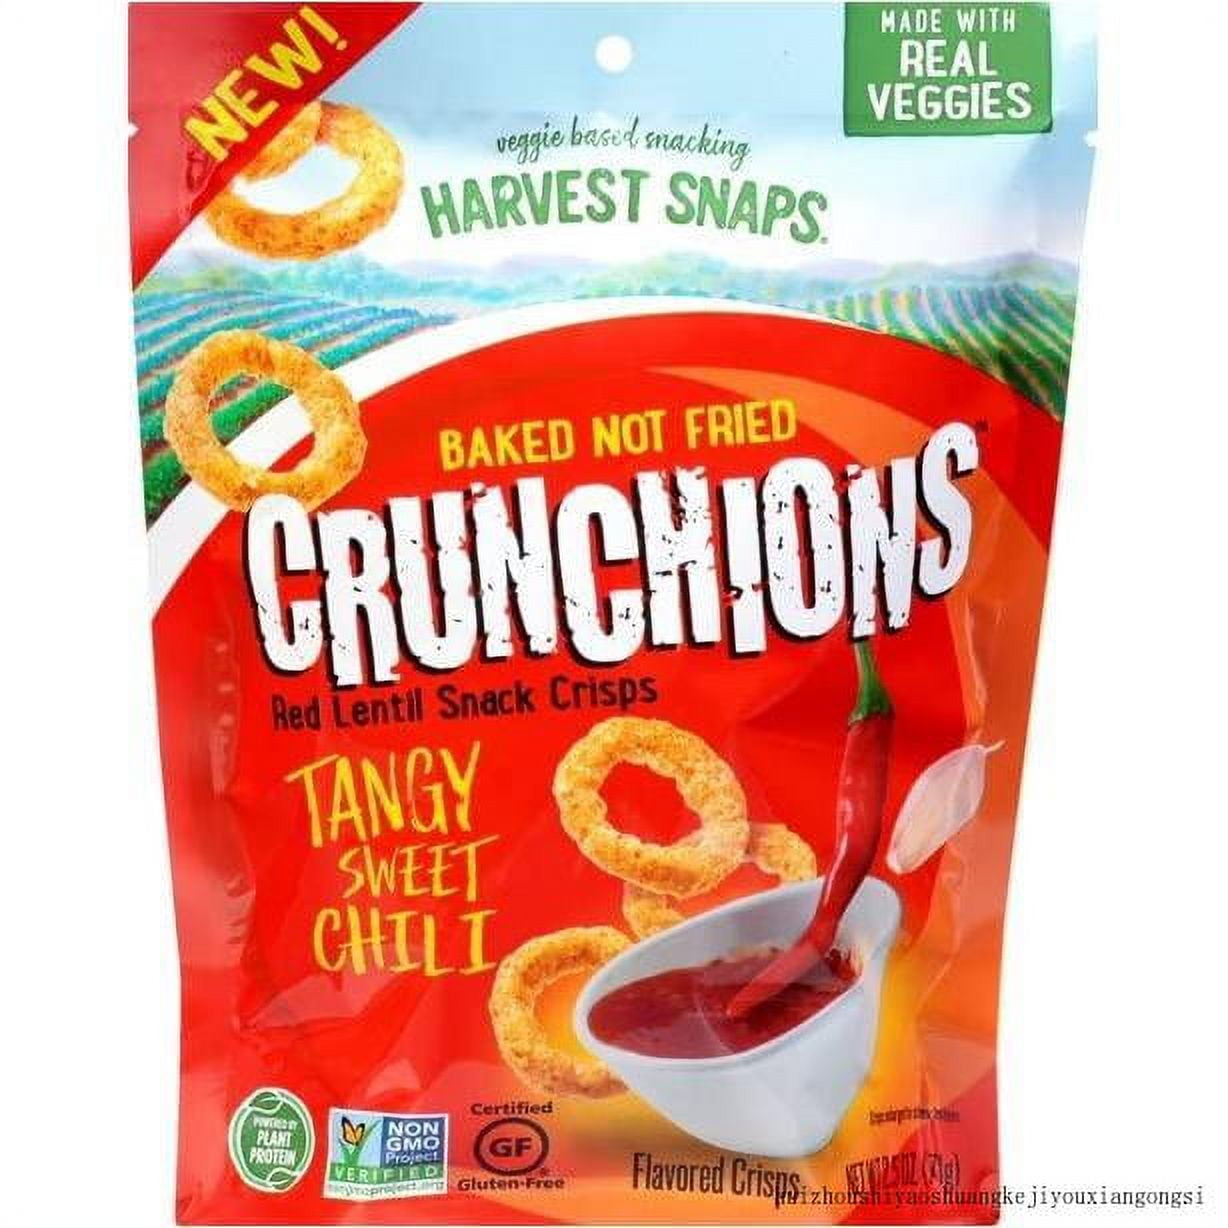 New Harvest Snaps Flavors, Bigger Bag Resealable Pouches, 2018-11-26